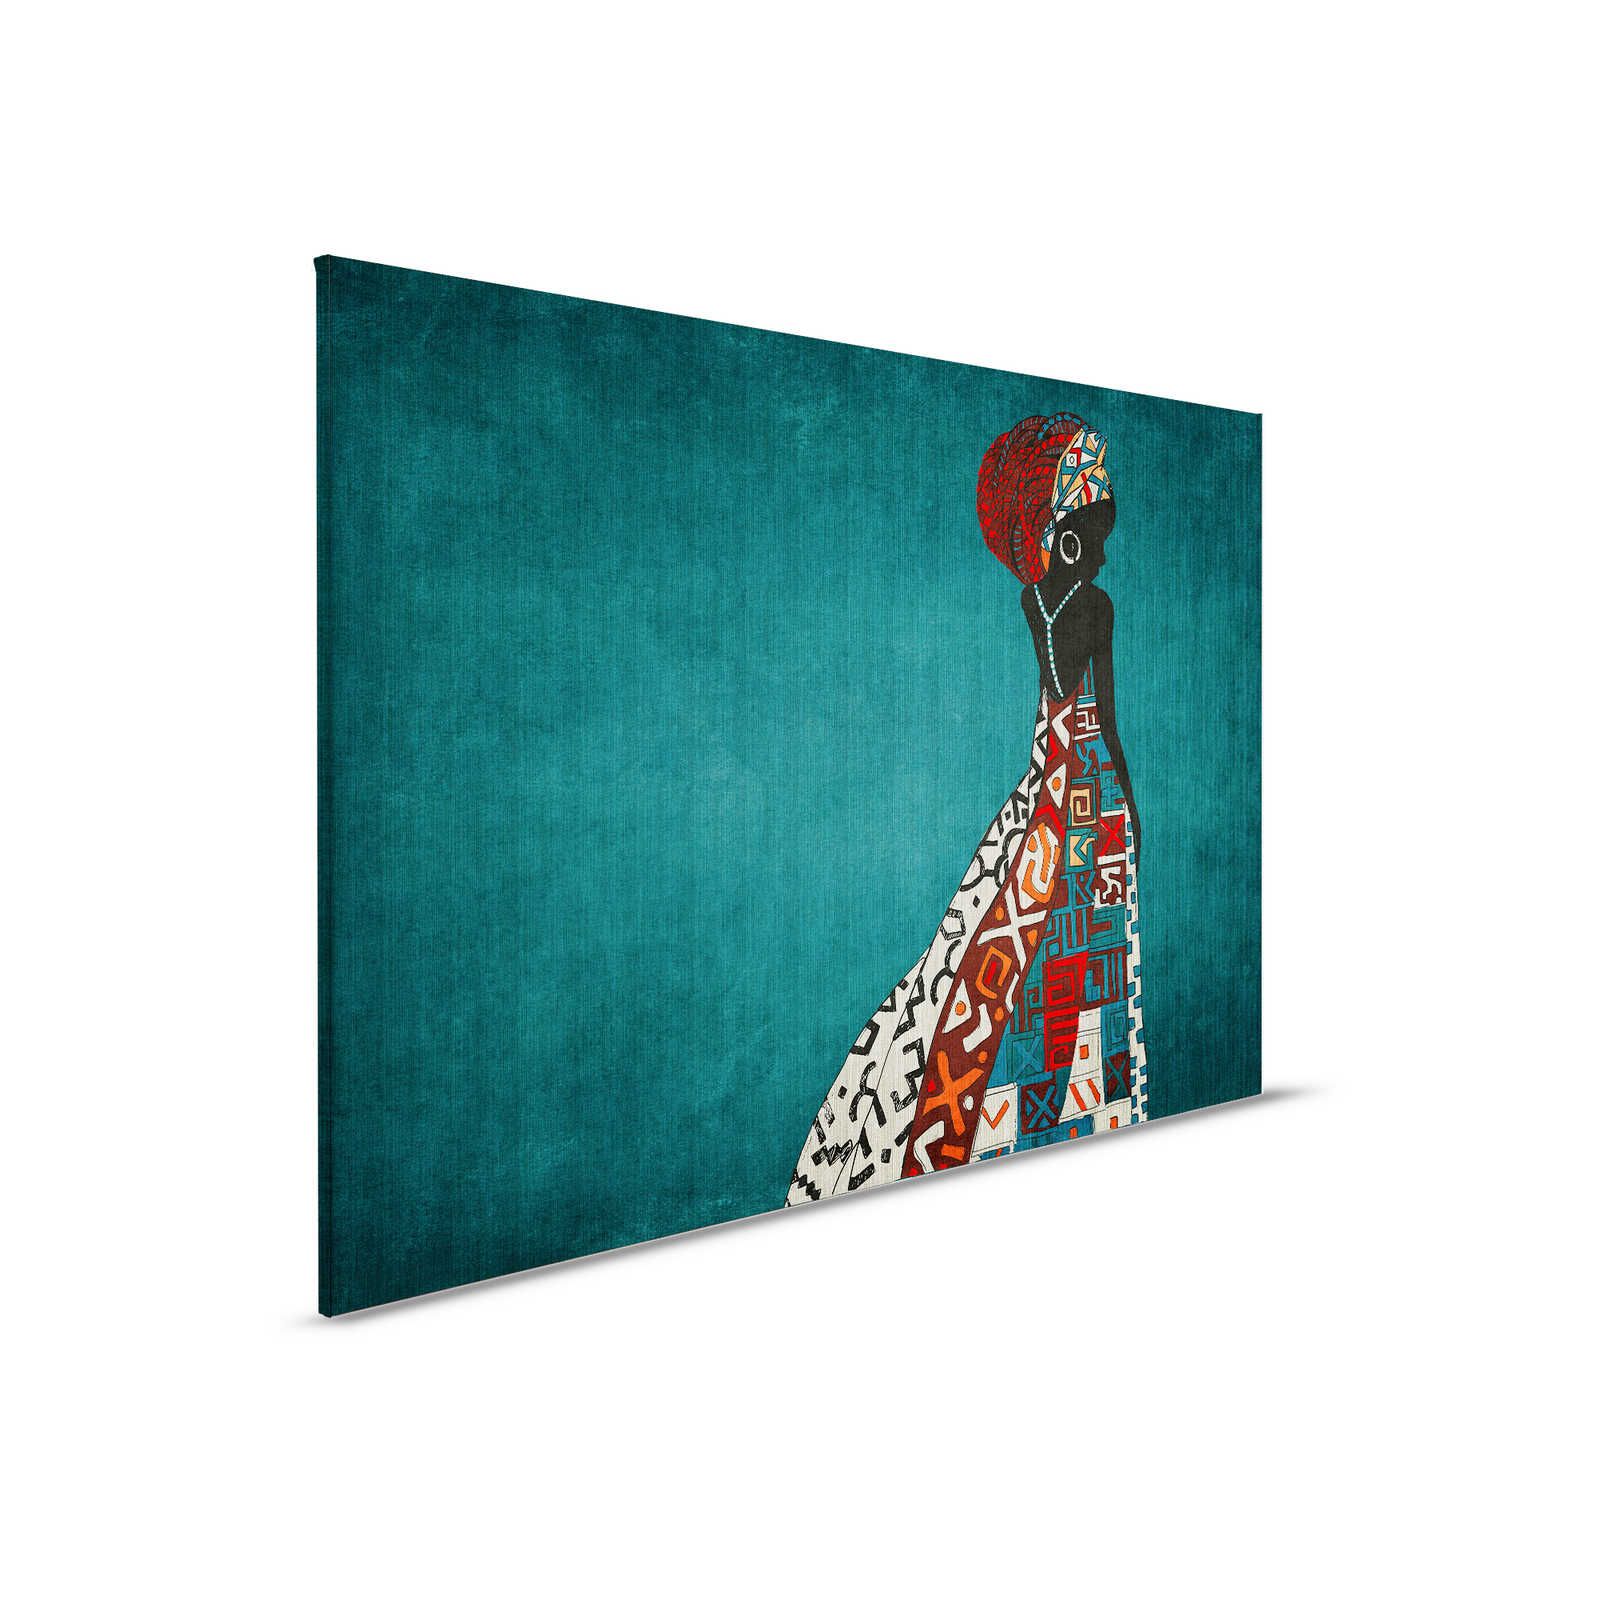         Nairobi 1 - Canvas painting Women Sillouette African Style - 0,90 m x 0,60 m
    